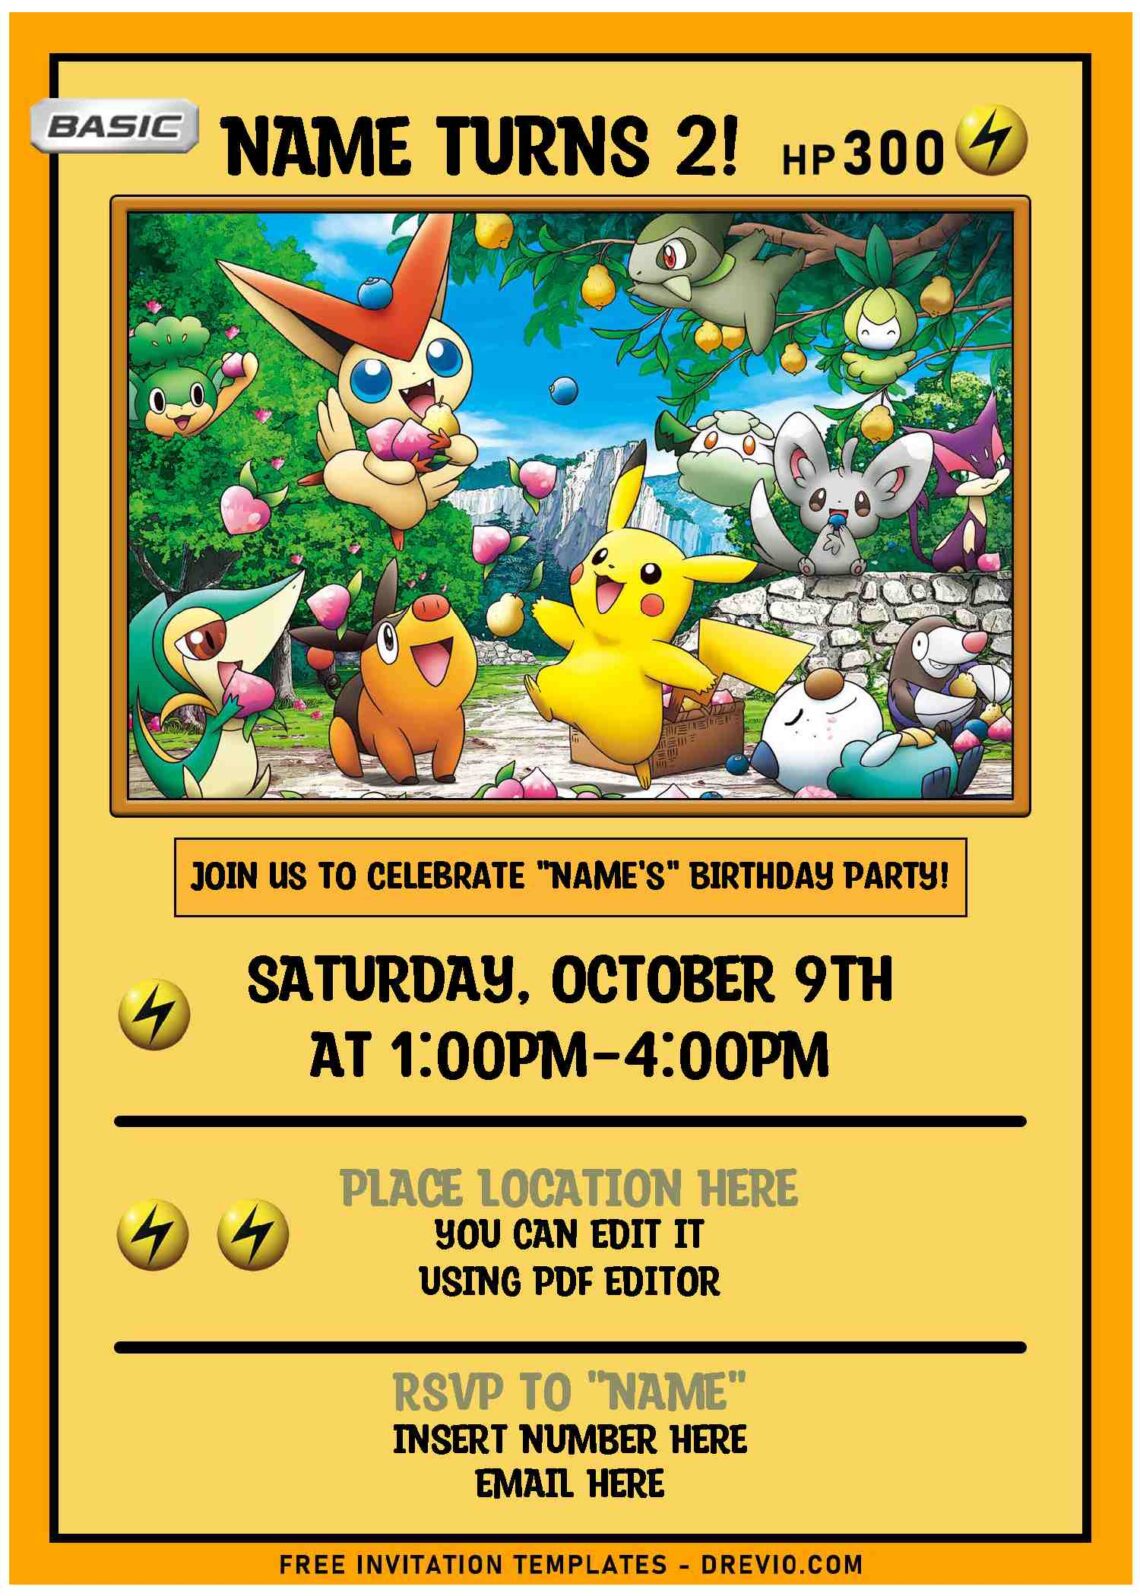 (Free Editable PDF) Cute And Awesome Pokemon Kids Birthday Party Invitation Templates with awesome Pokemon card design